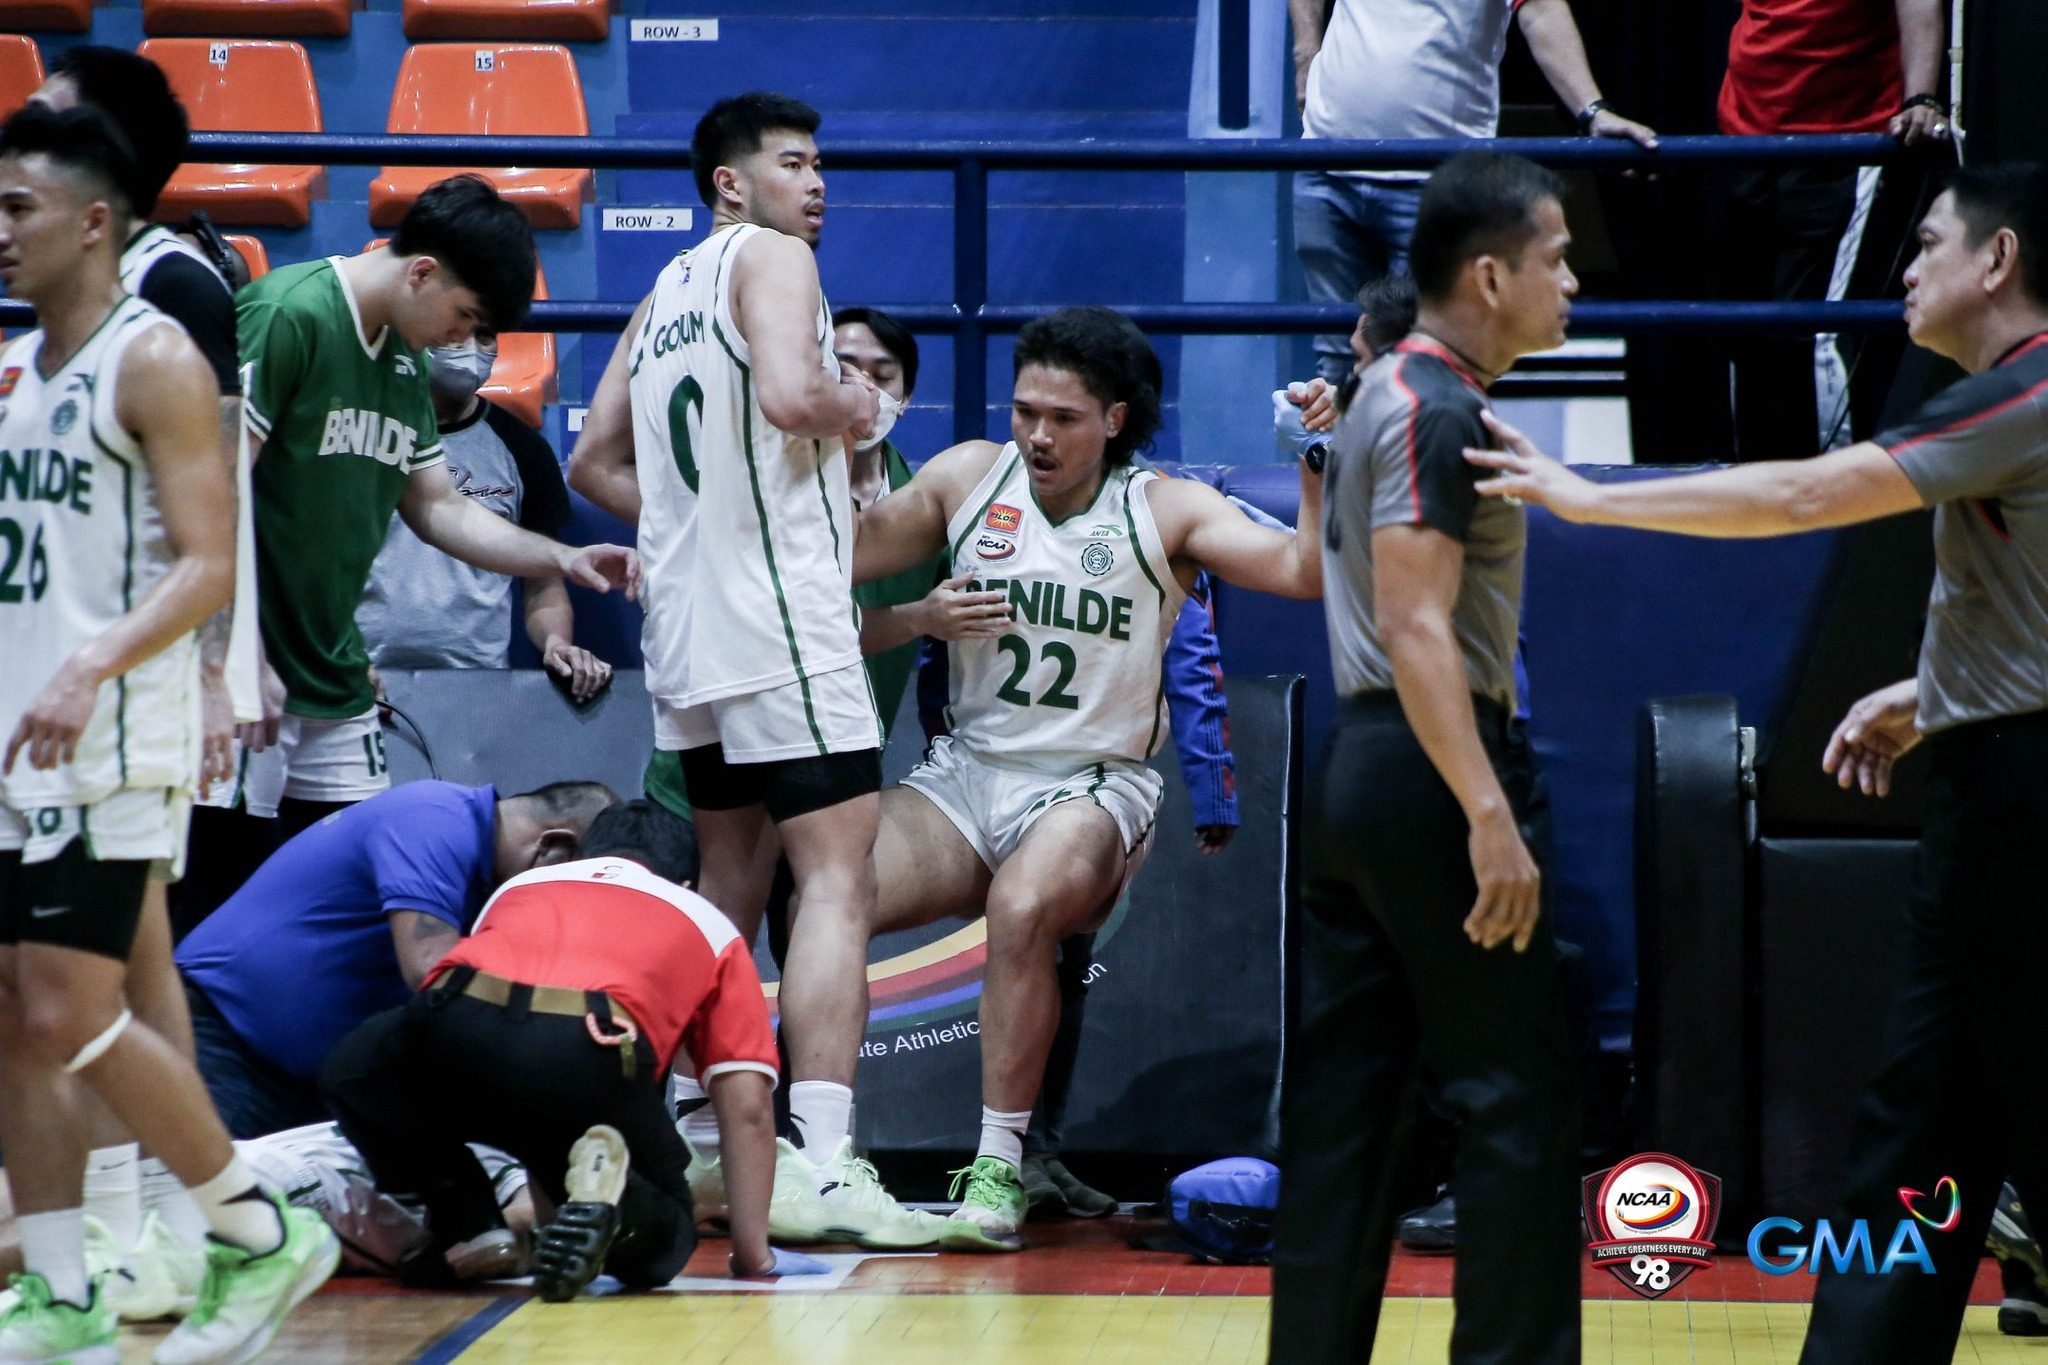 CSB players evade surgery, mull charges after Amores assault